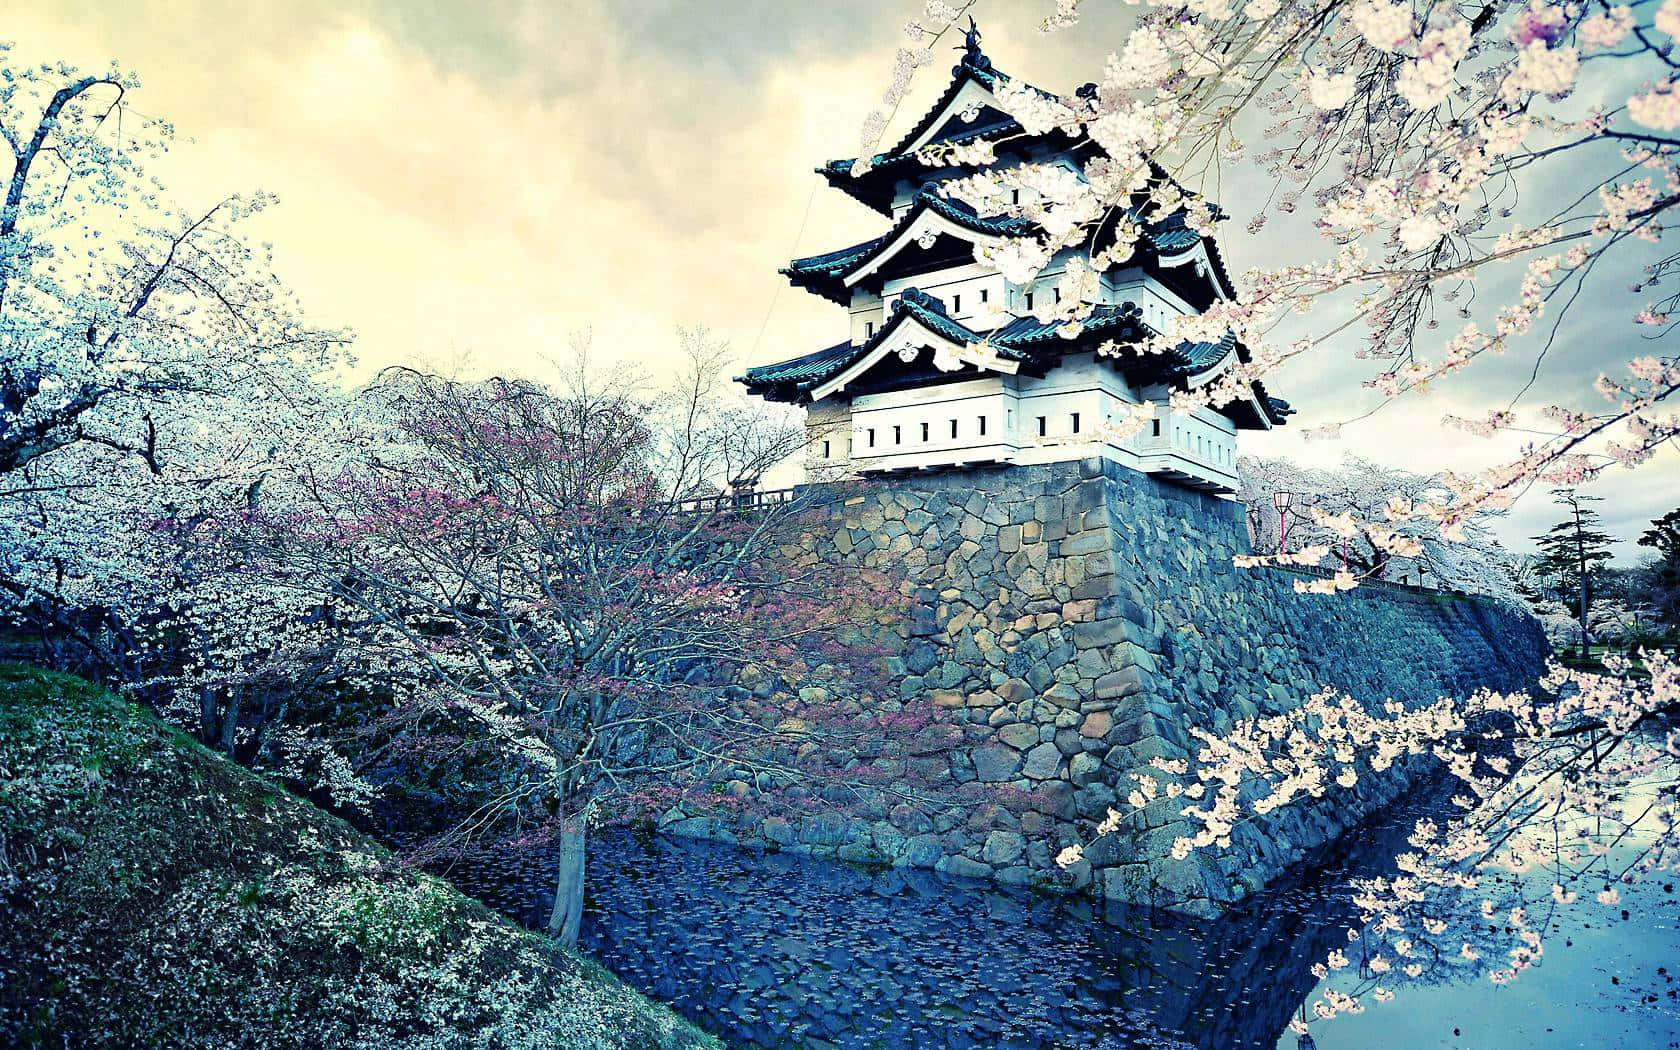 Enjoy the beauty of a traditional Japanese desktop background Wallpaper